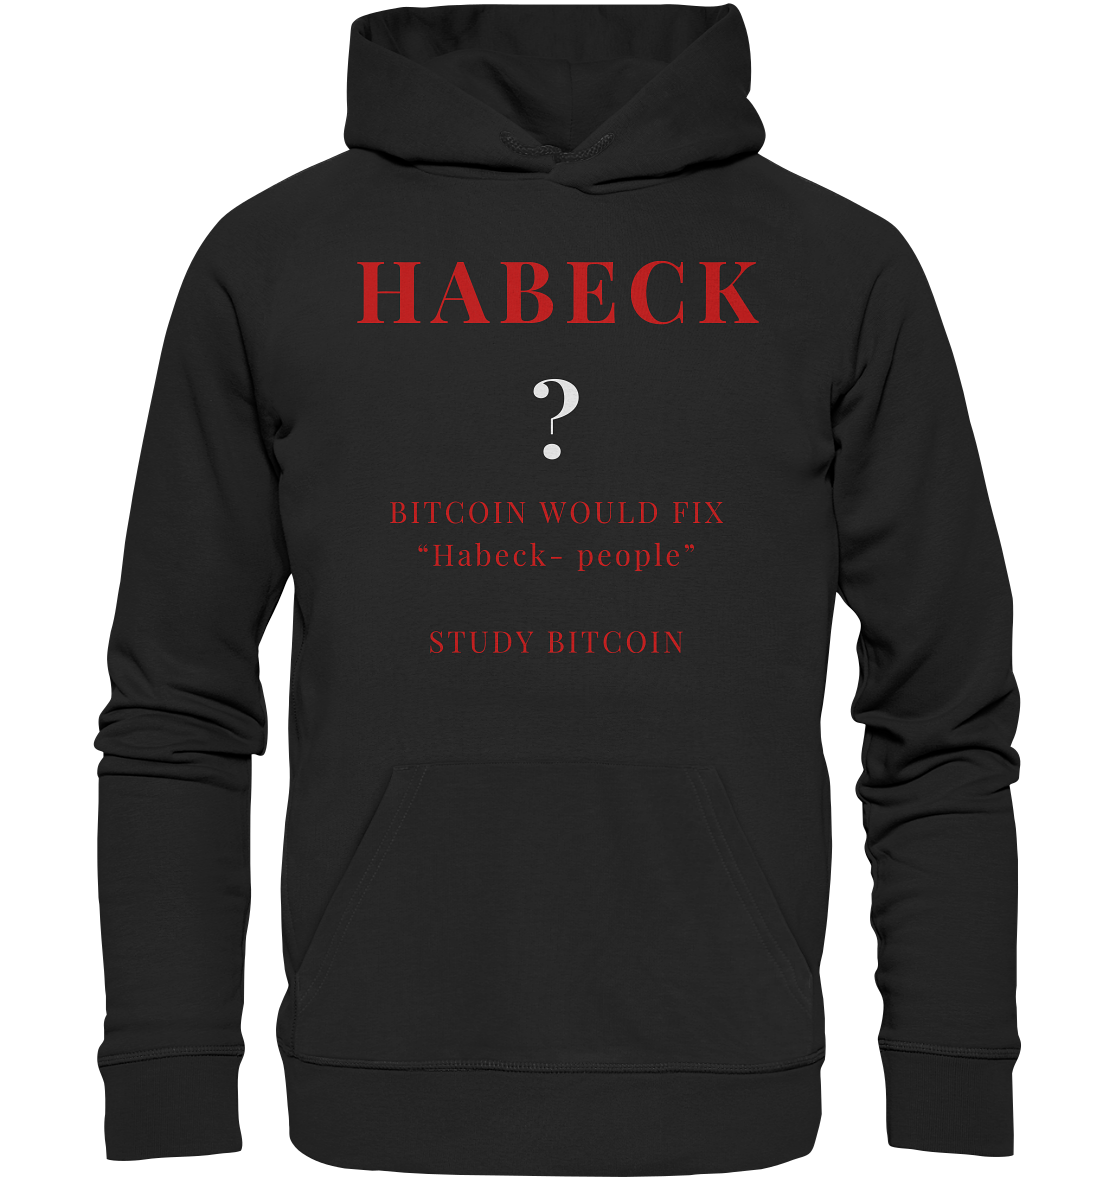 HABECK ? BITCOIN WOULD FIX "Habeck people" - STUDY BITCOIN  - Organic Basic Hoodie